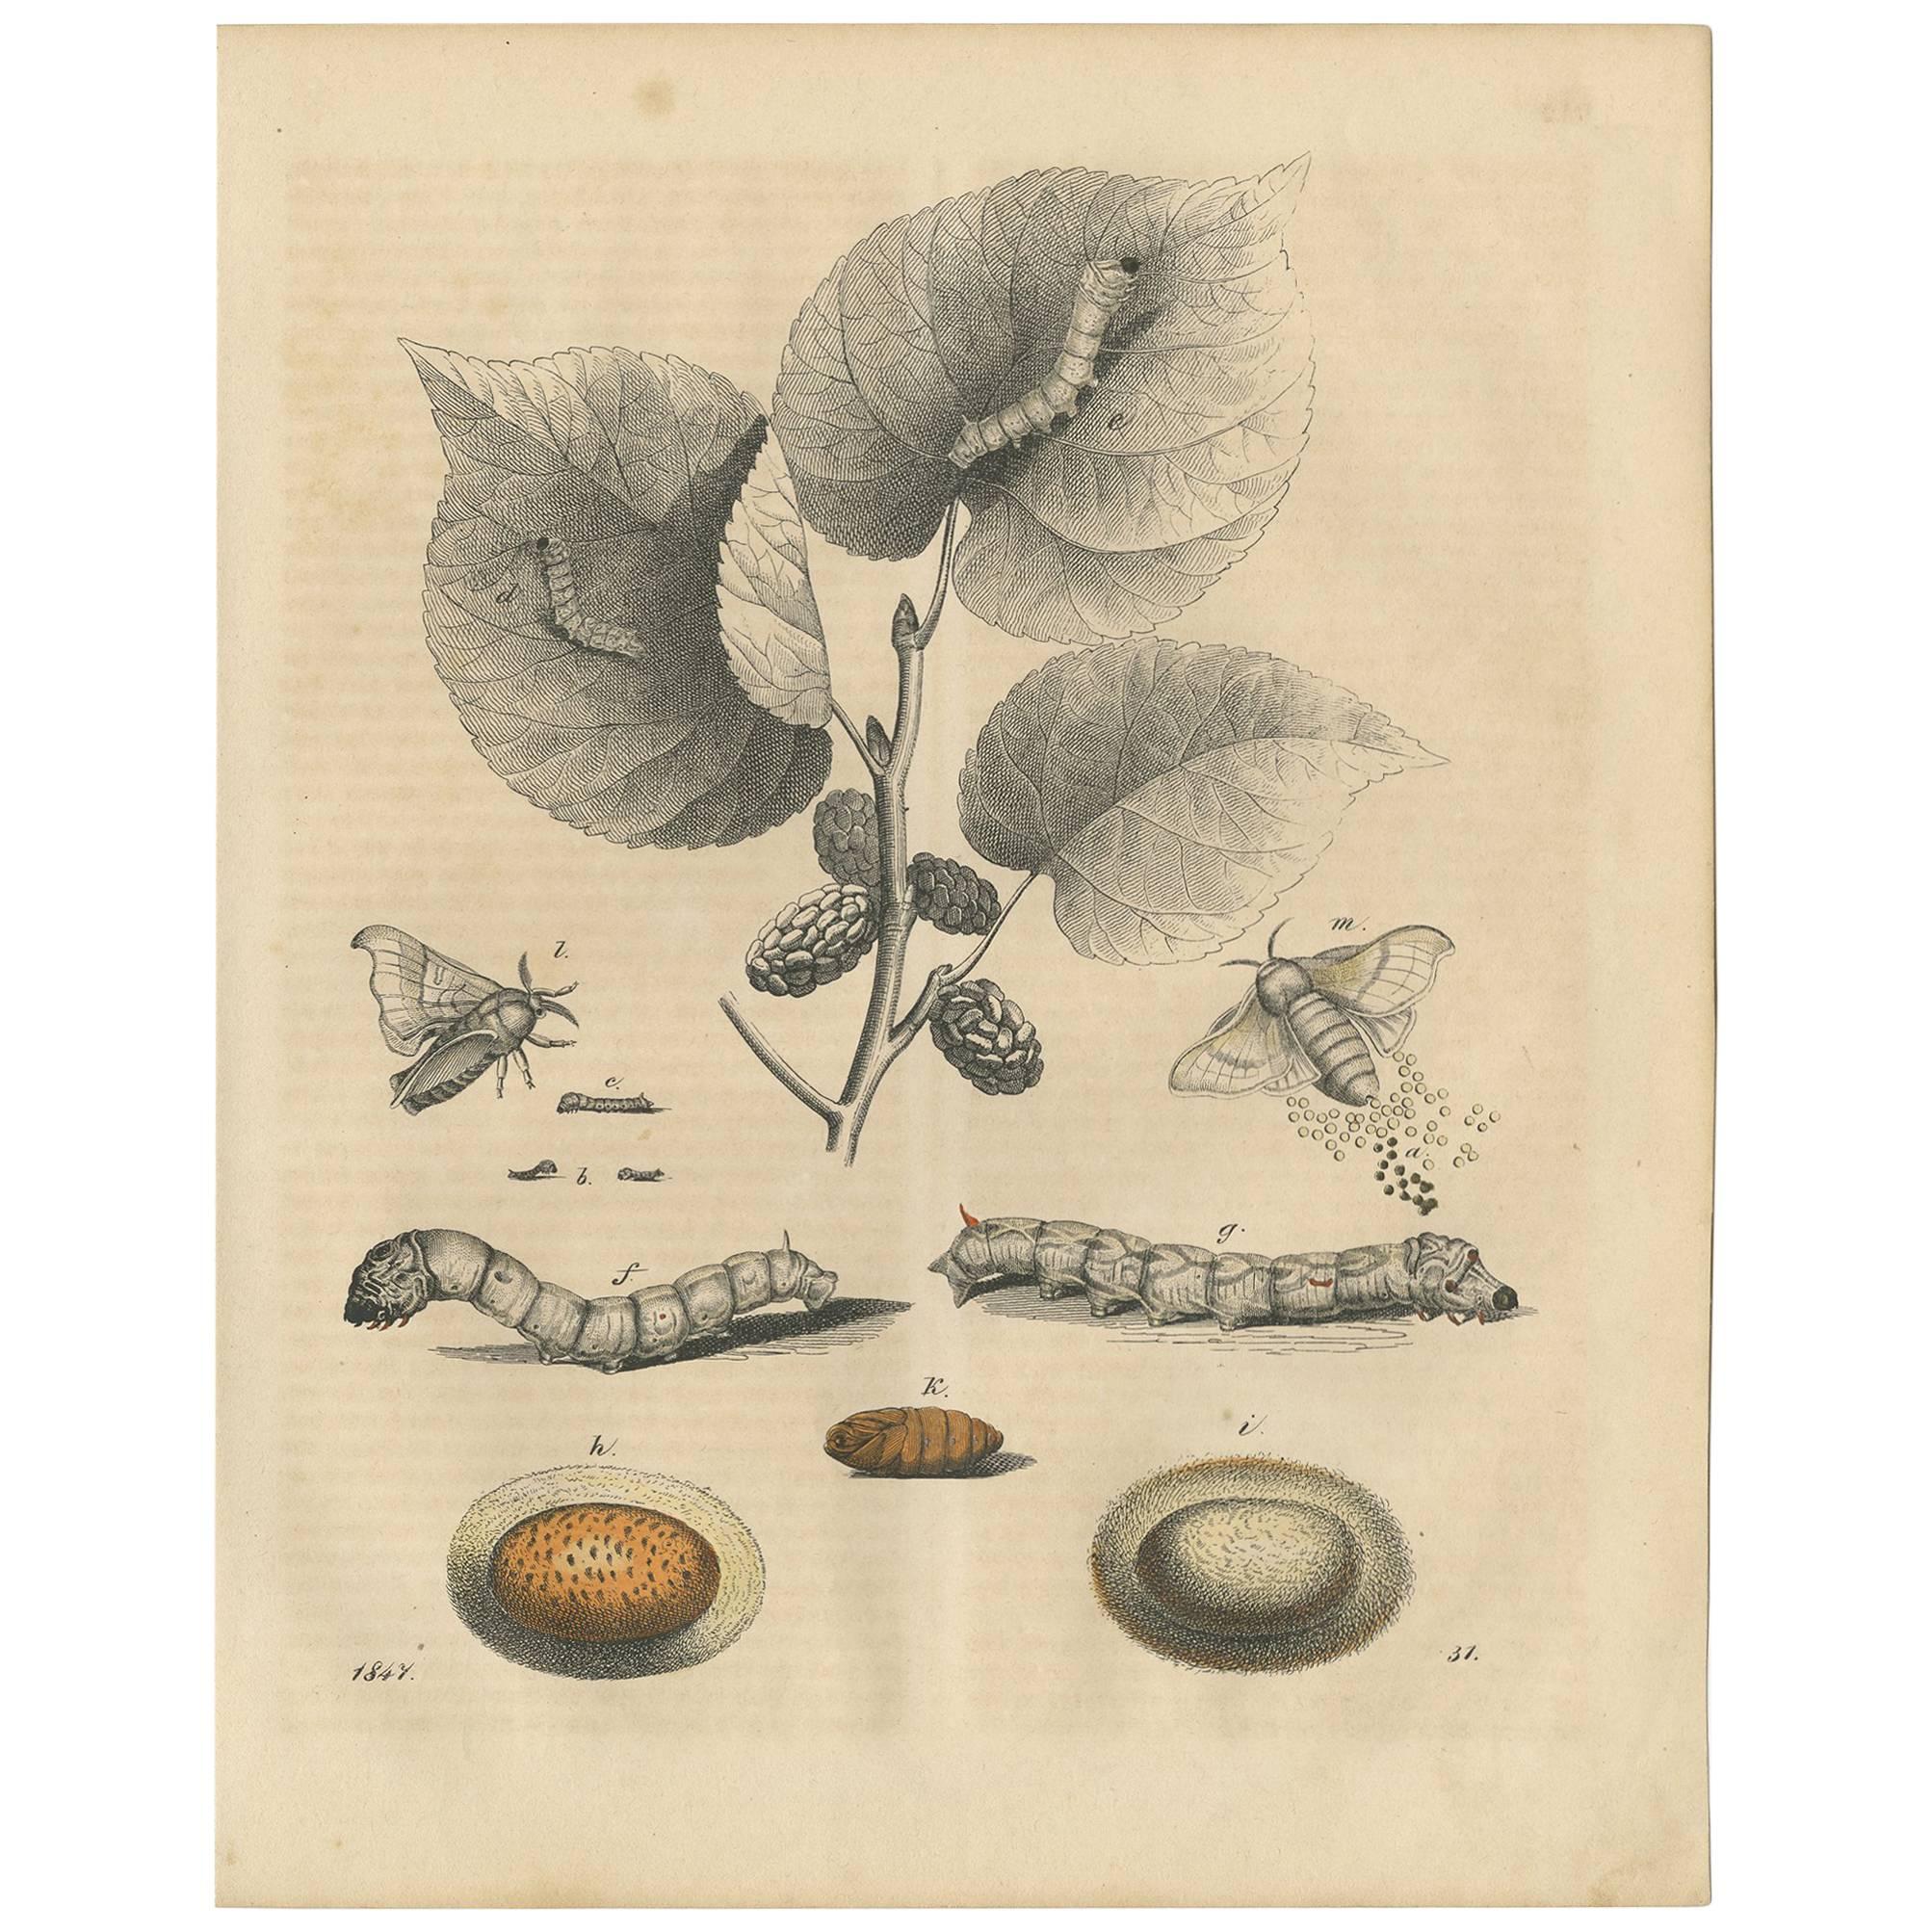 Antique Animal Print of Caterpillars, Moths and Pupa by C. Hoffmann, 1847 For Sale